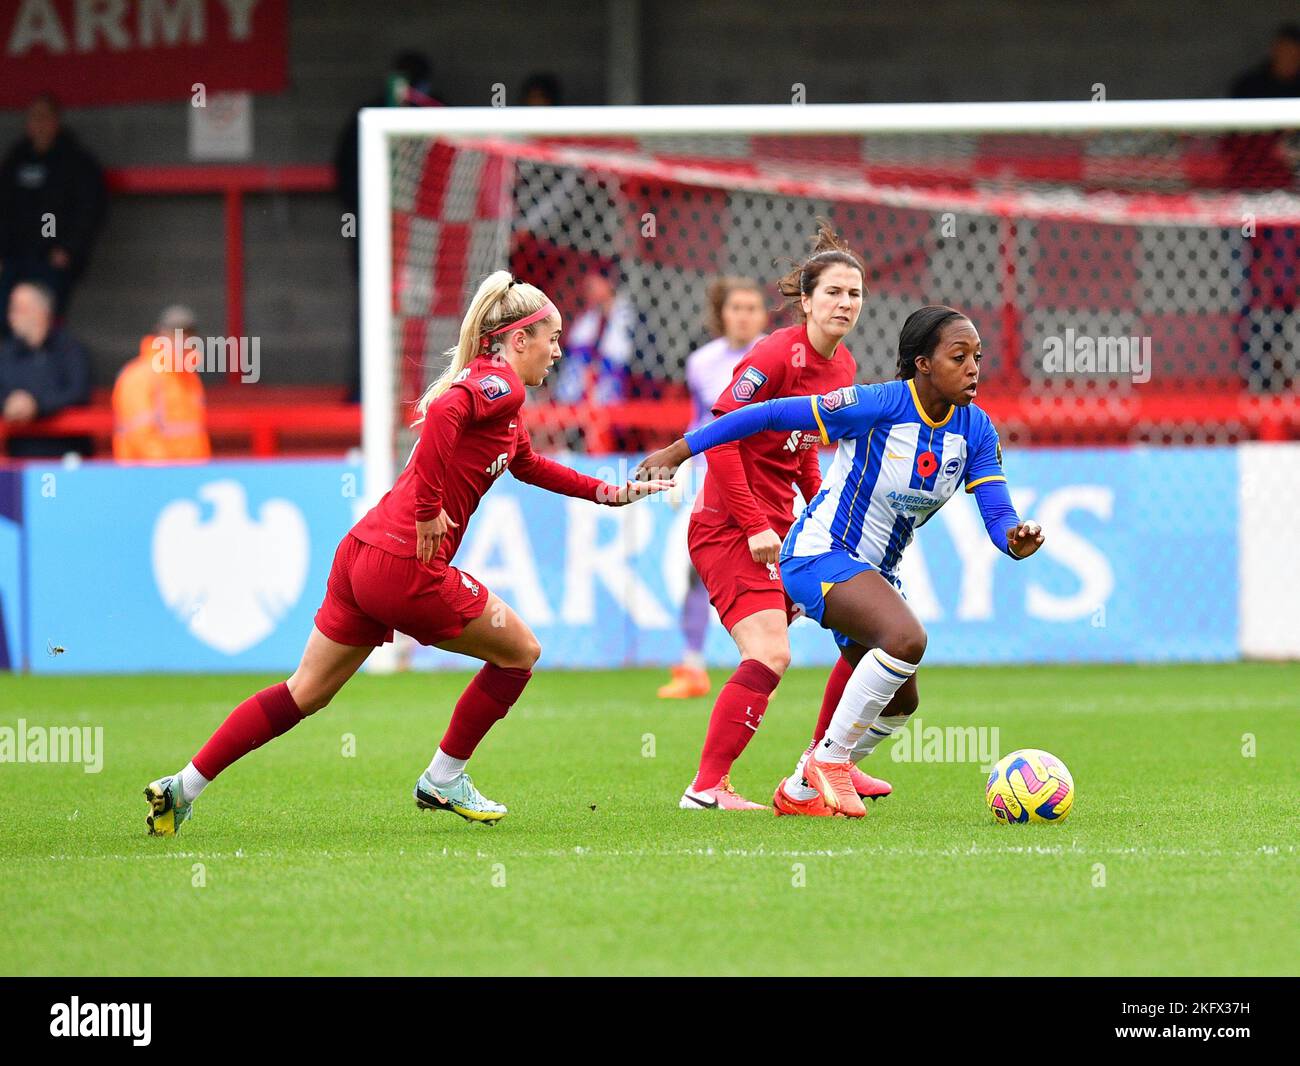 Crawley, UK. 20th Nov, 2022. Danielle Carter of Brighton and Hove Albion controls the ball under pressure from Missy Bo Kearns of Liverpool during the FA Women's Super League match between Brighton & Hove Albion Women and Liverpool Women at The People's Pension Stadium on November 20th 2022 in Crawley, United Kingdom. (Photo by Jeff Mood/phcimages.com) Credit: PHC Images/Alamy Live News Stock Photo